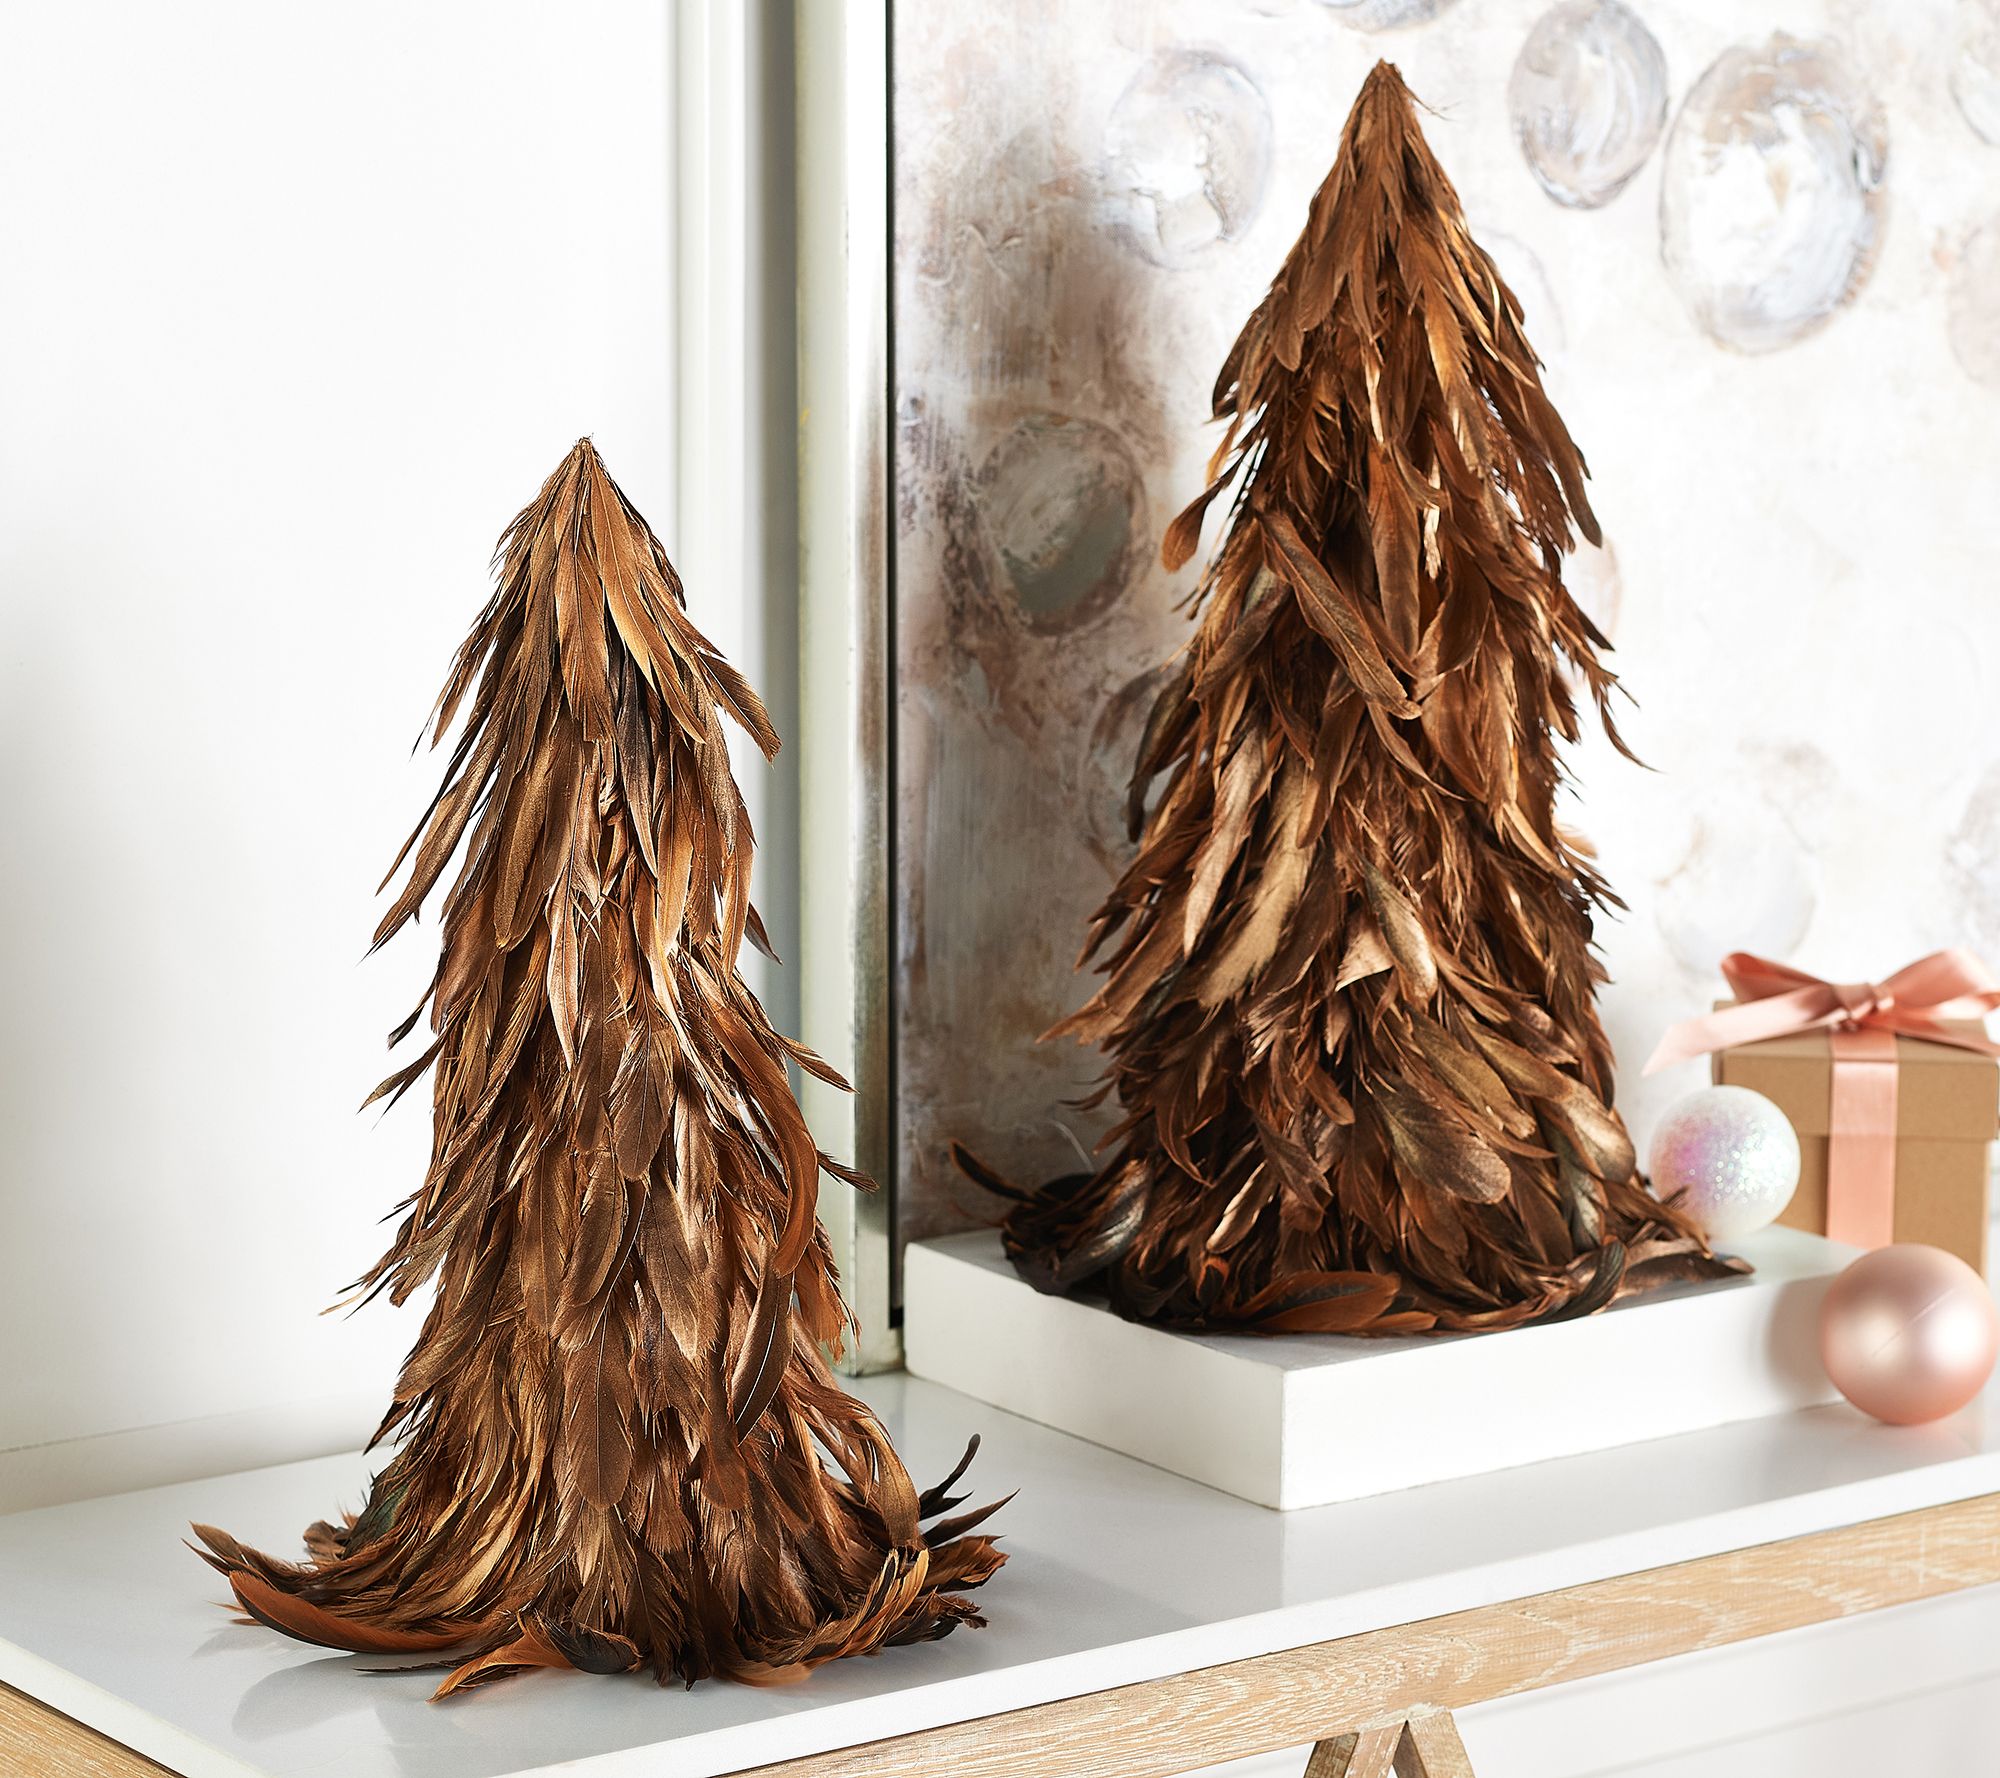 Simply Stunning S/3 19 Cascading Pinecone Picks by Janine Graff